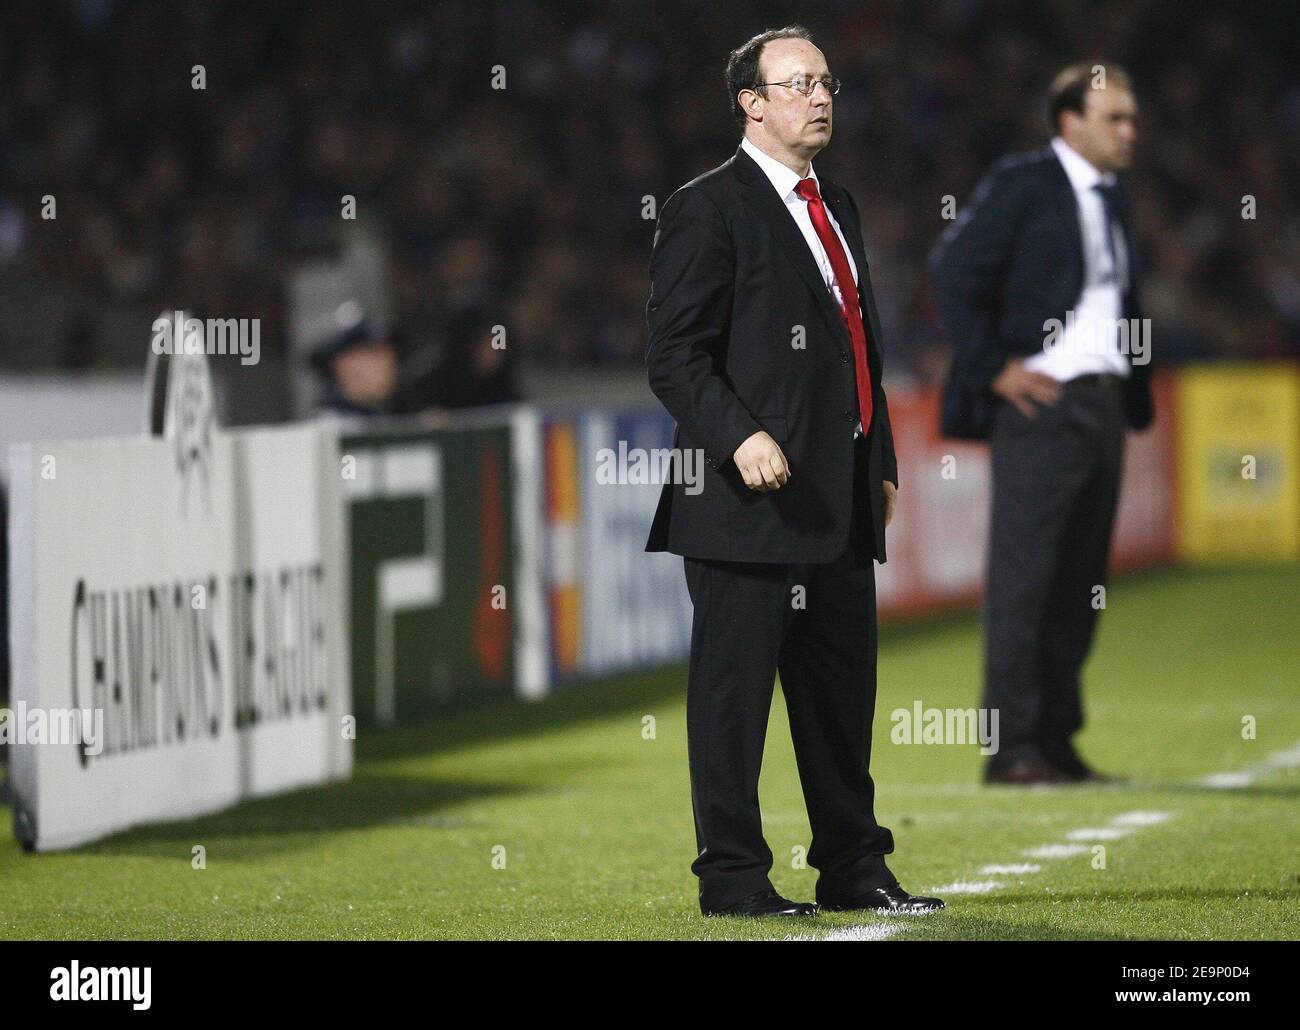 Liverpool' coach Rafael Benitez during the UEFA Champions League, Group C, Girondins de Bordeaux vs Liverpool FC at the Stade Chaban-Delmas in Bordeaux, France on October 18, 2006. Liverpool won 1-0. Photo by Christian Liewig/ABACAPRESS.COM Stock Photo